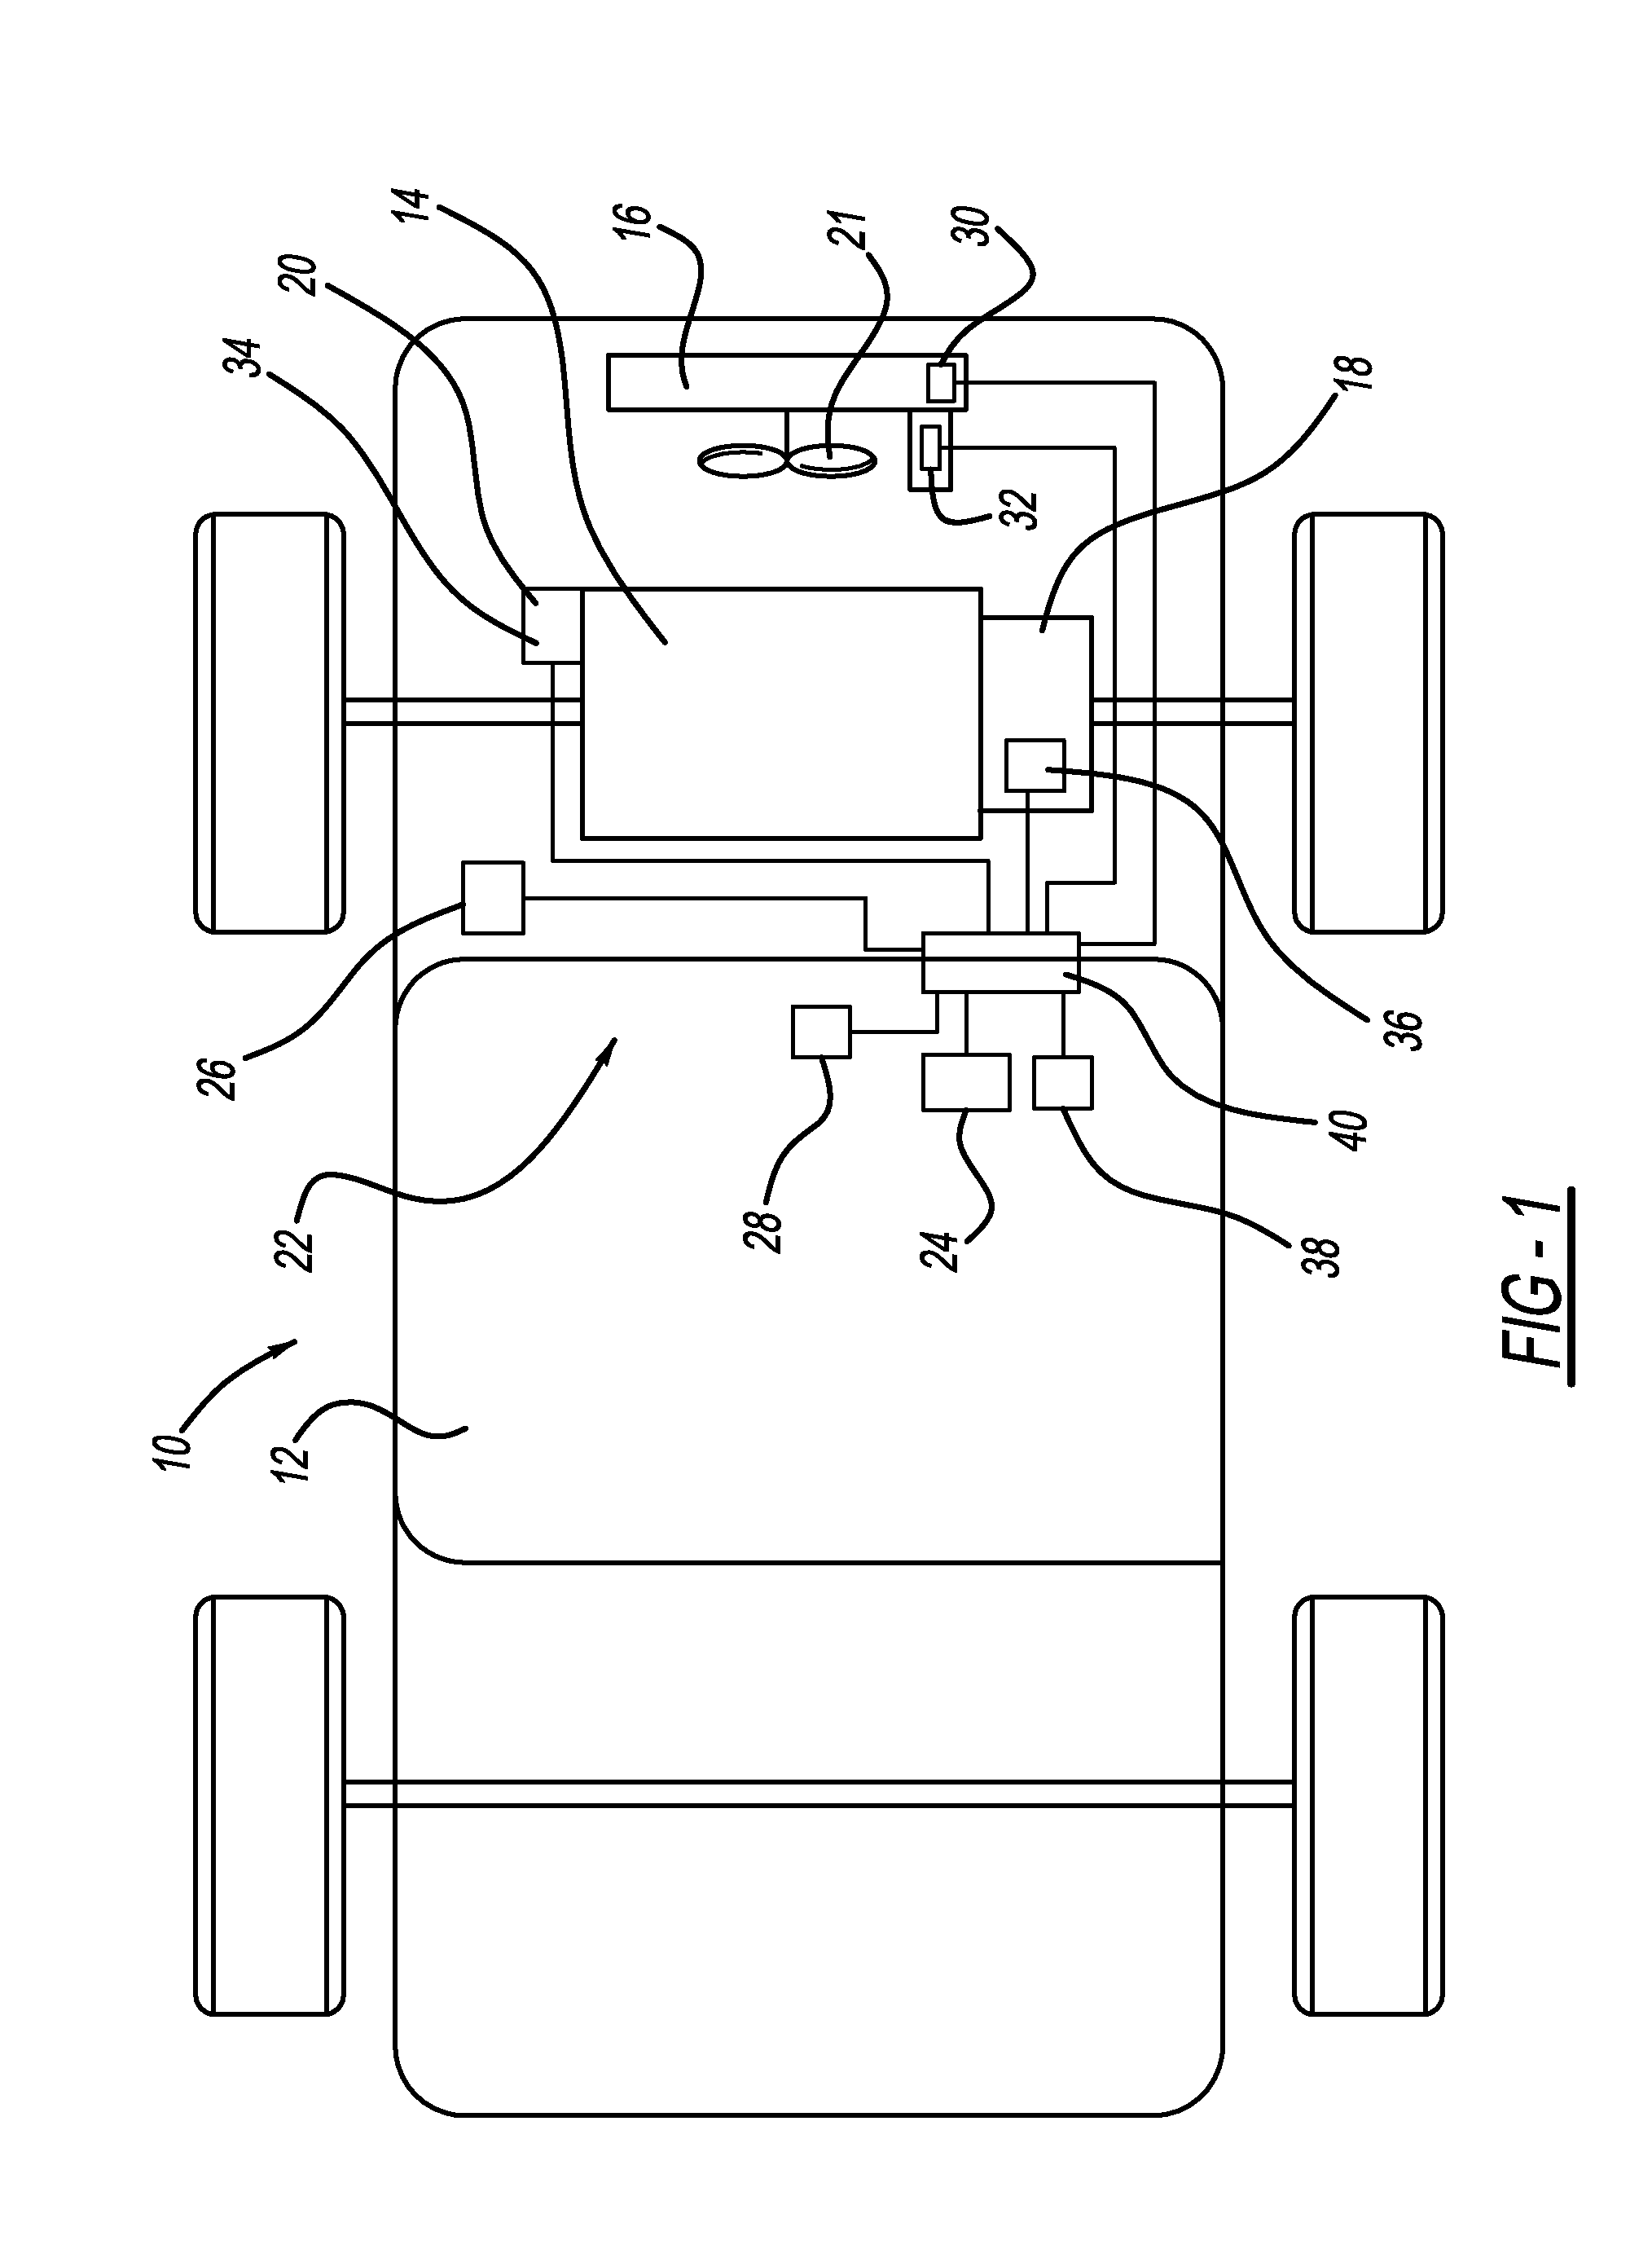 Smart transmission shift delay method and system for climate control for a vehicle